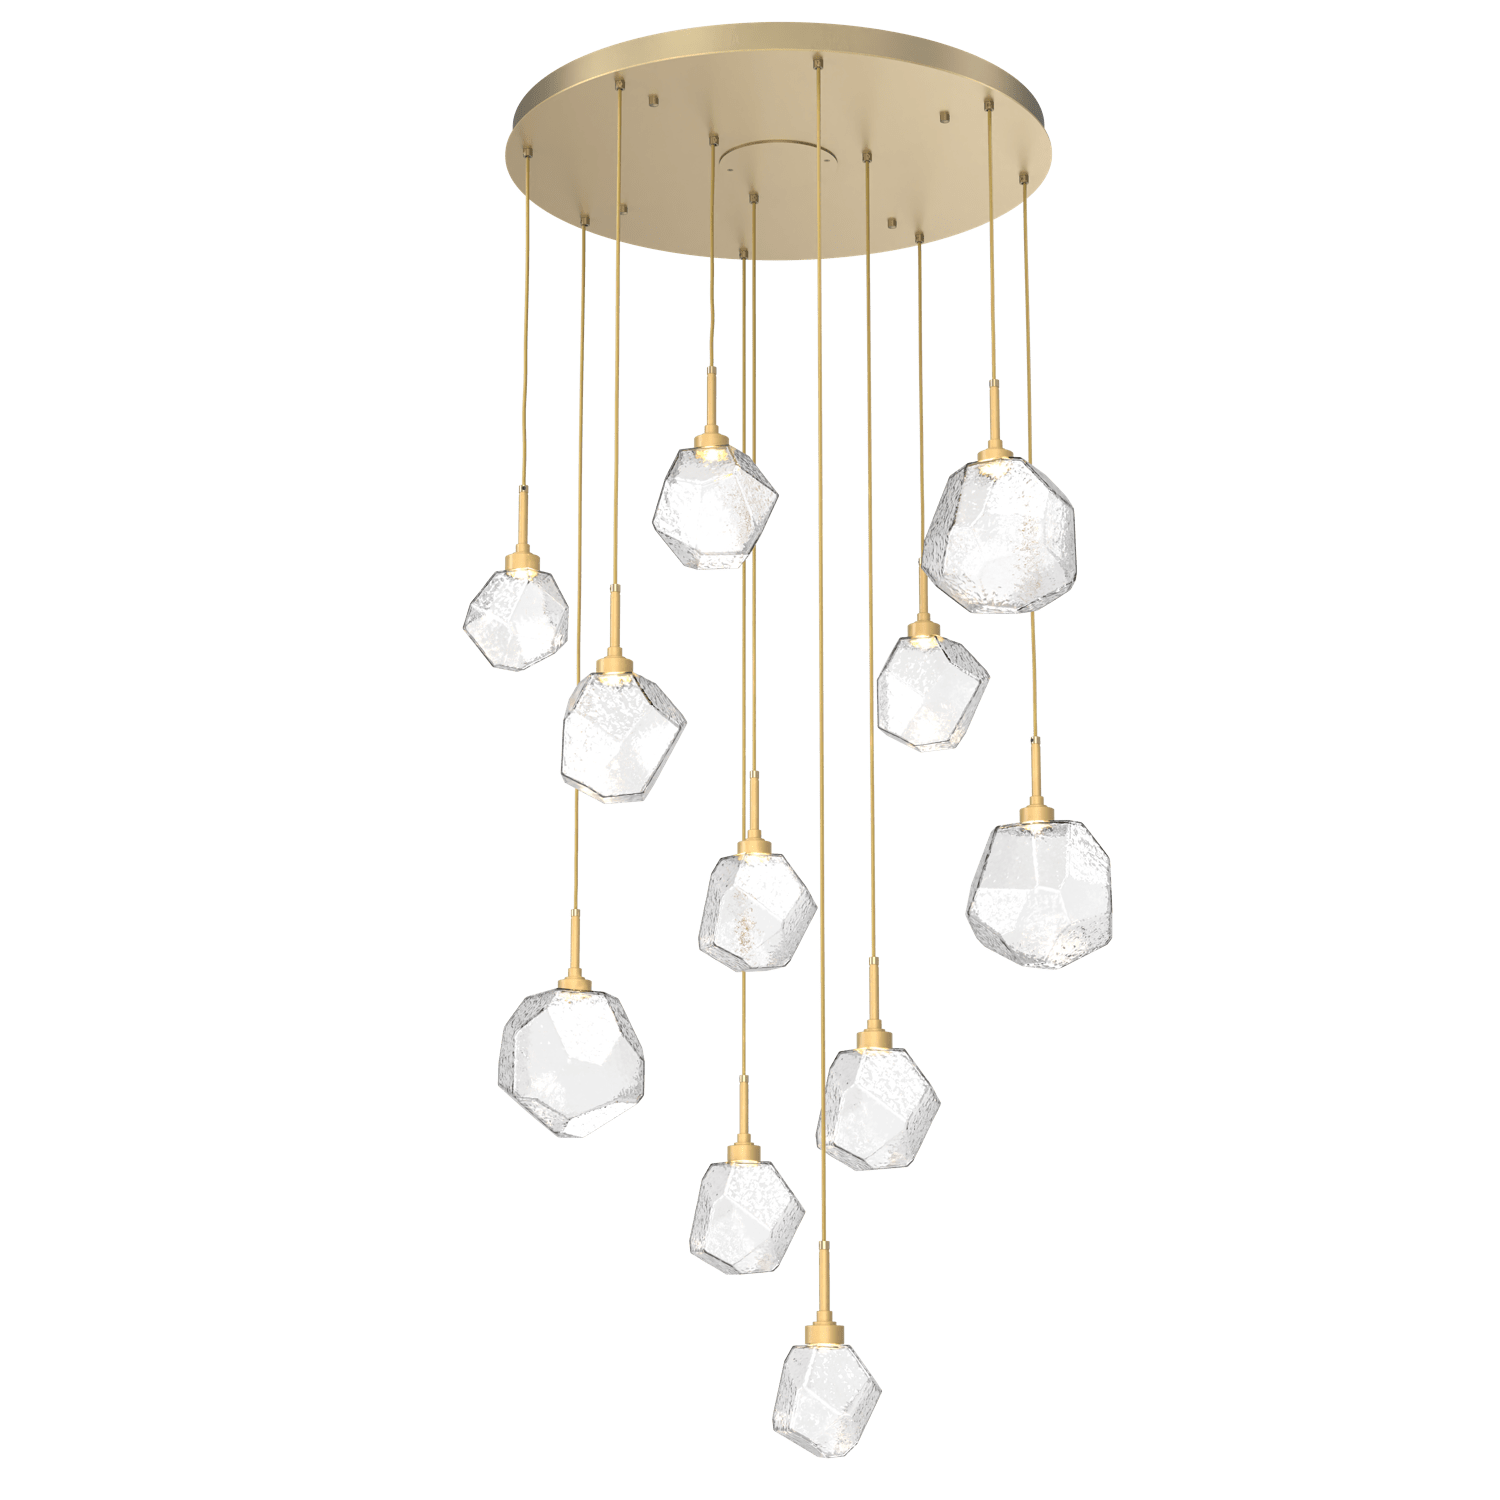 CHB0039-11-GB-C-Hammerton-Studio-Gem-11-light-round-pendant-chandelier-with-gilded-brass-finish-and-clear-blown-glass-shades-and-LED-lamping